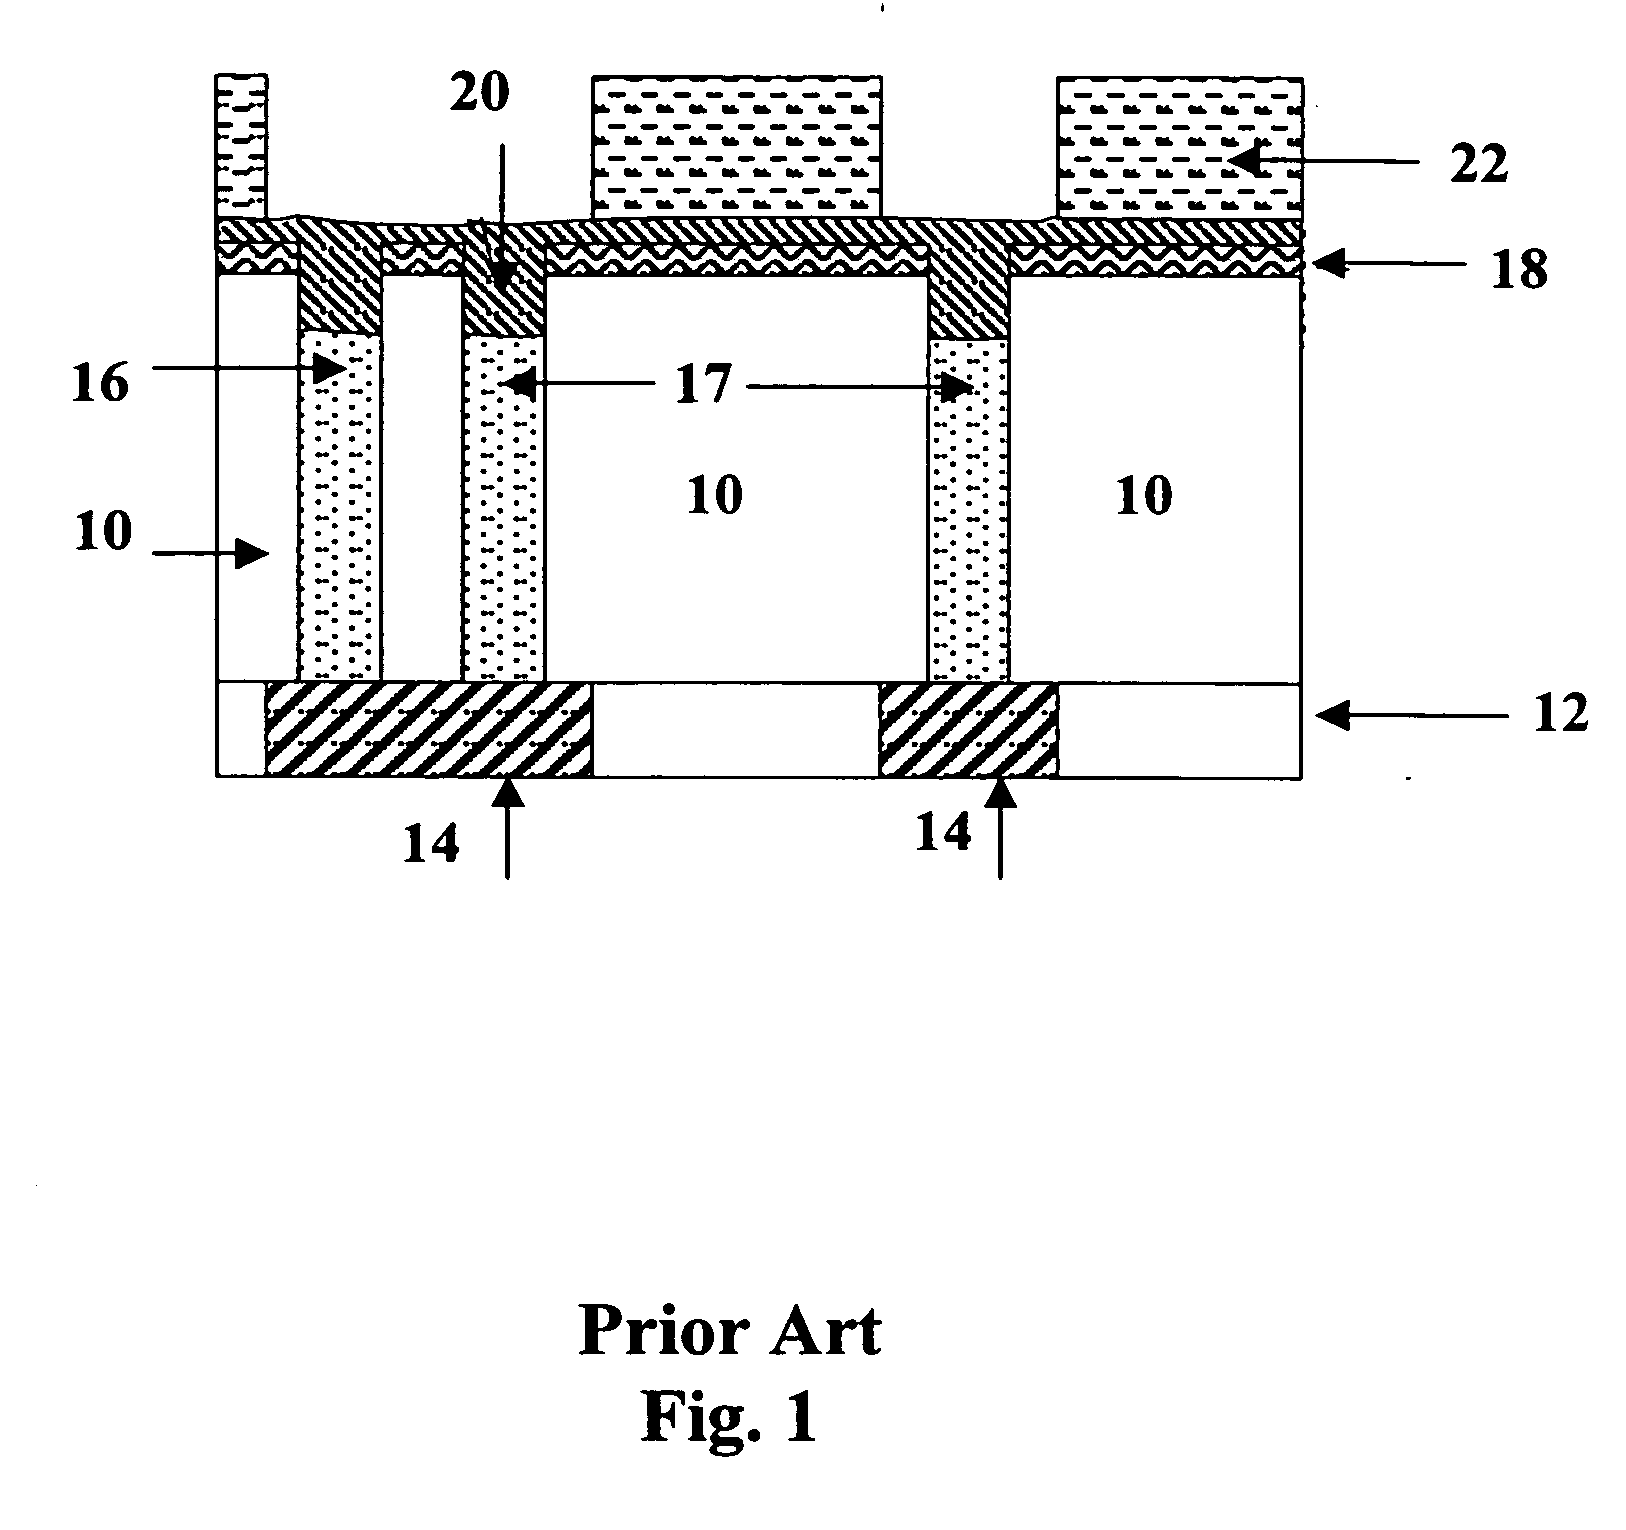 Method of filling structures for forming via-first dual damascene interconnects